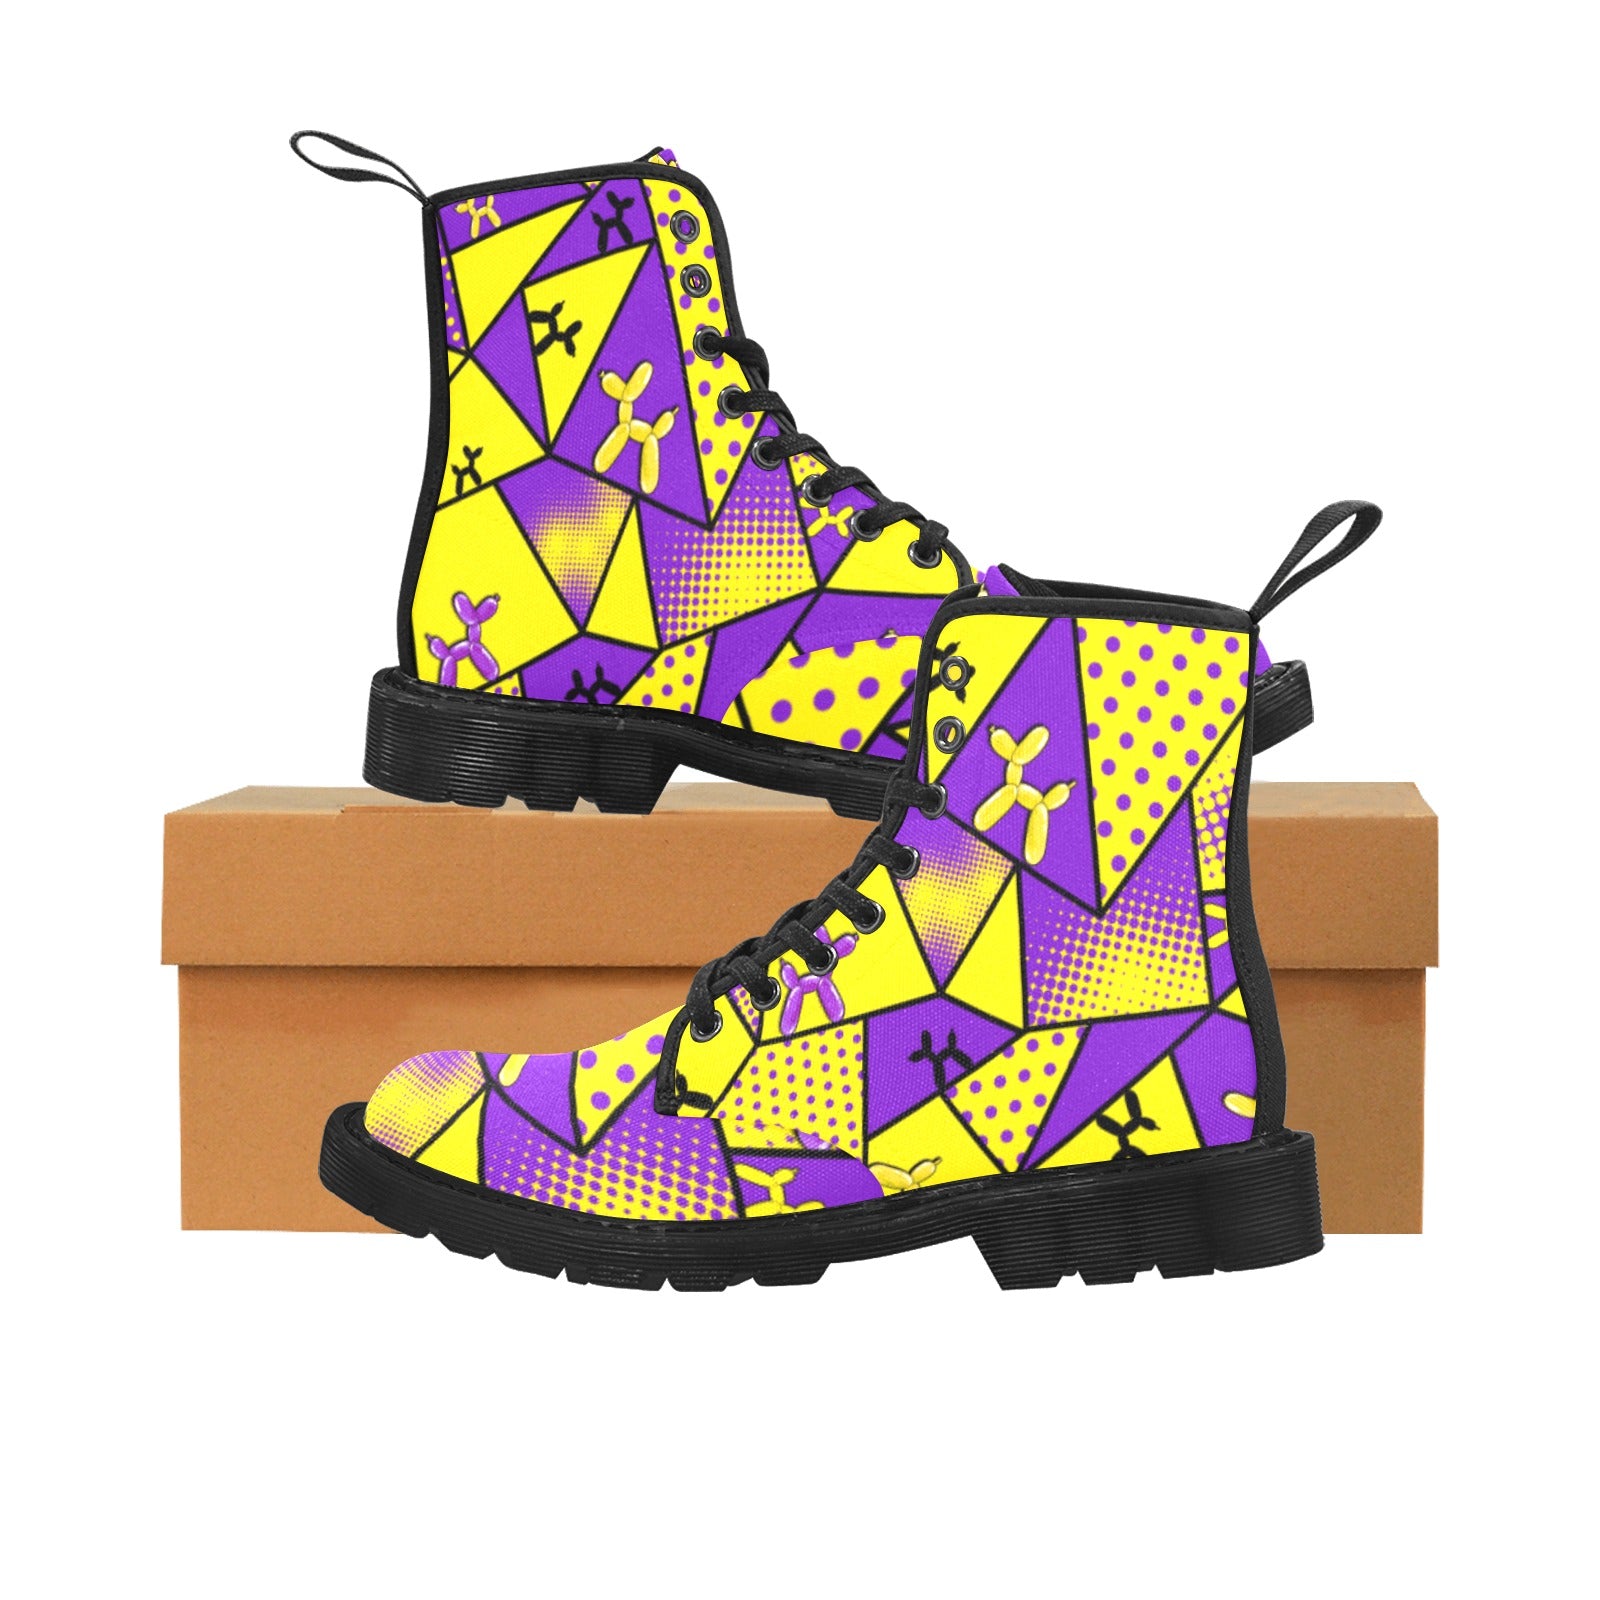 Yellow and purple combat boots for the professional entertainer